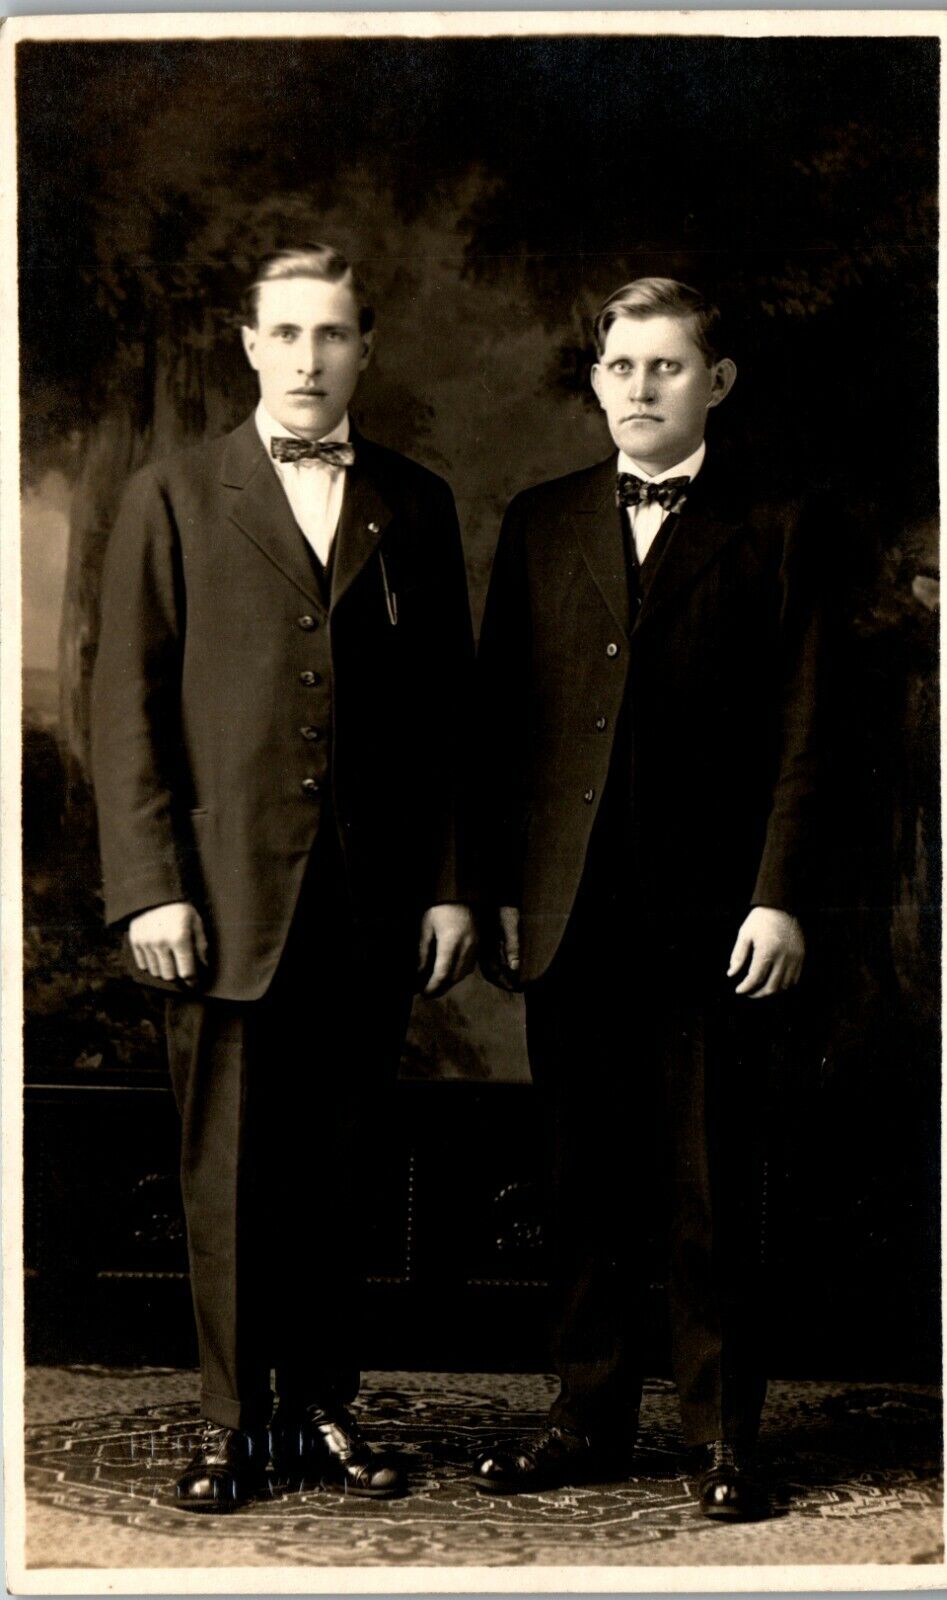  Two Handsome Brothers in formal 4 button suit 1920 era RPPC Vintage Post SB1